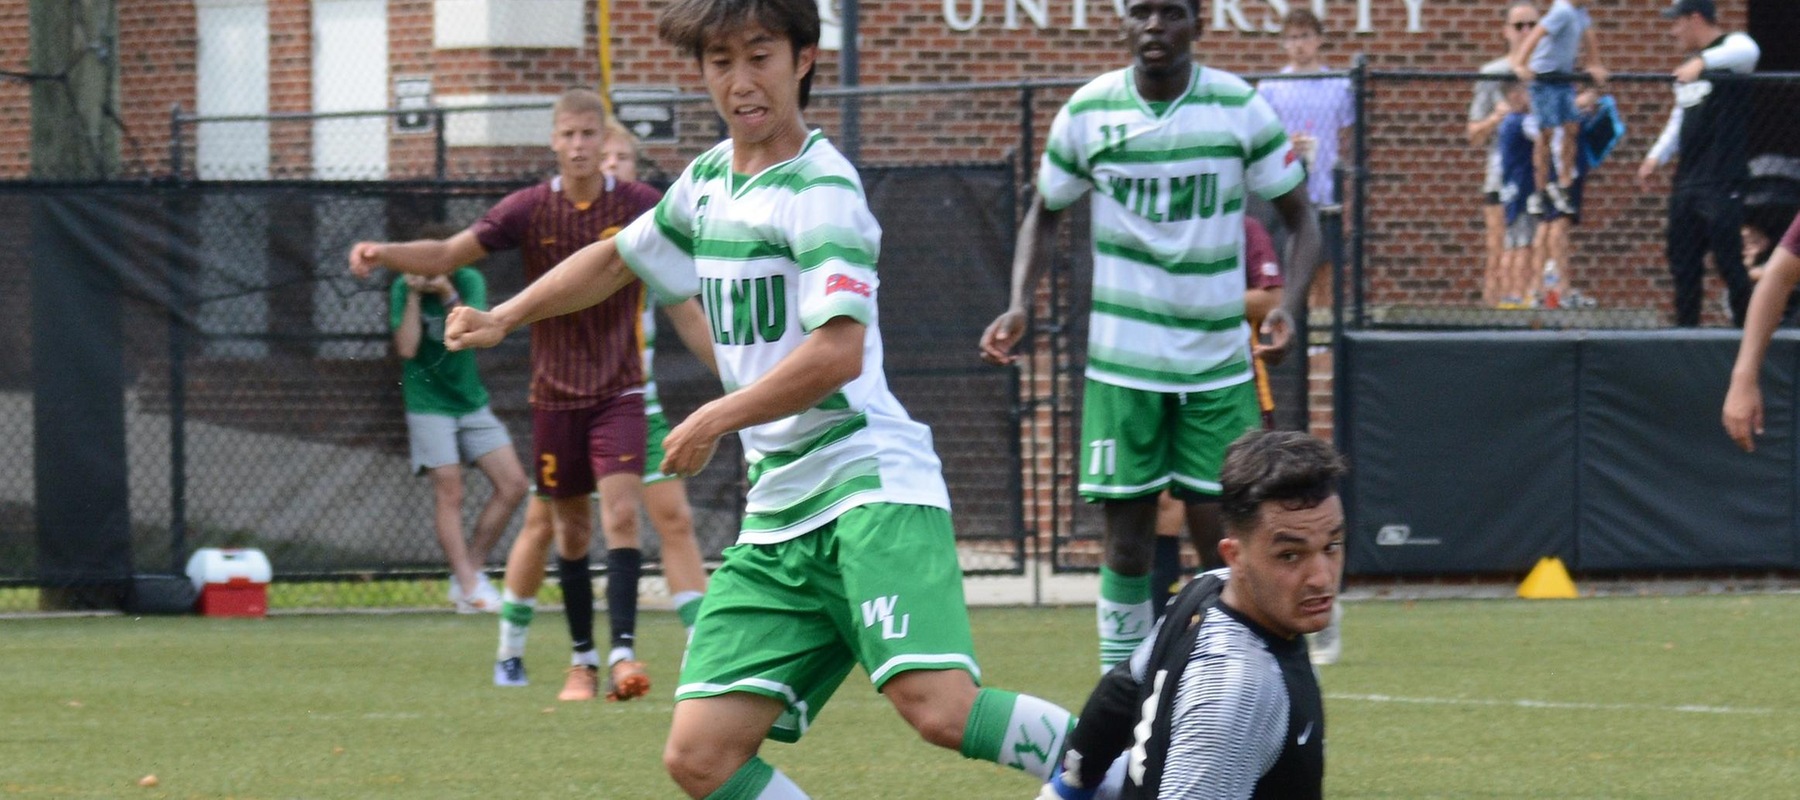 File photo of Sora Noda who scored the Wildcats' goal at Jefferson on Wednesday. Copyright 2023; Wilmington University. All rights reserved. Photo by Debra Breister.